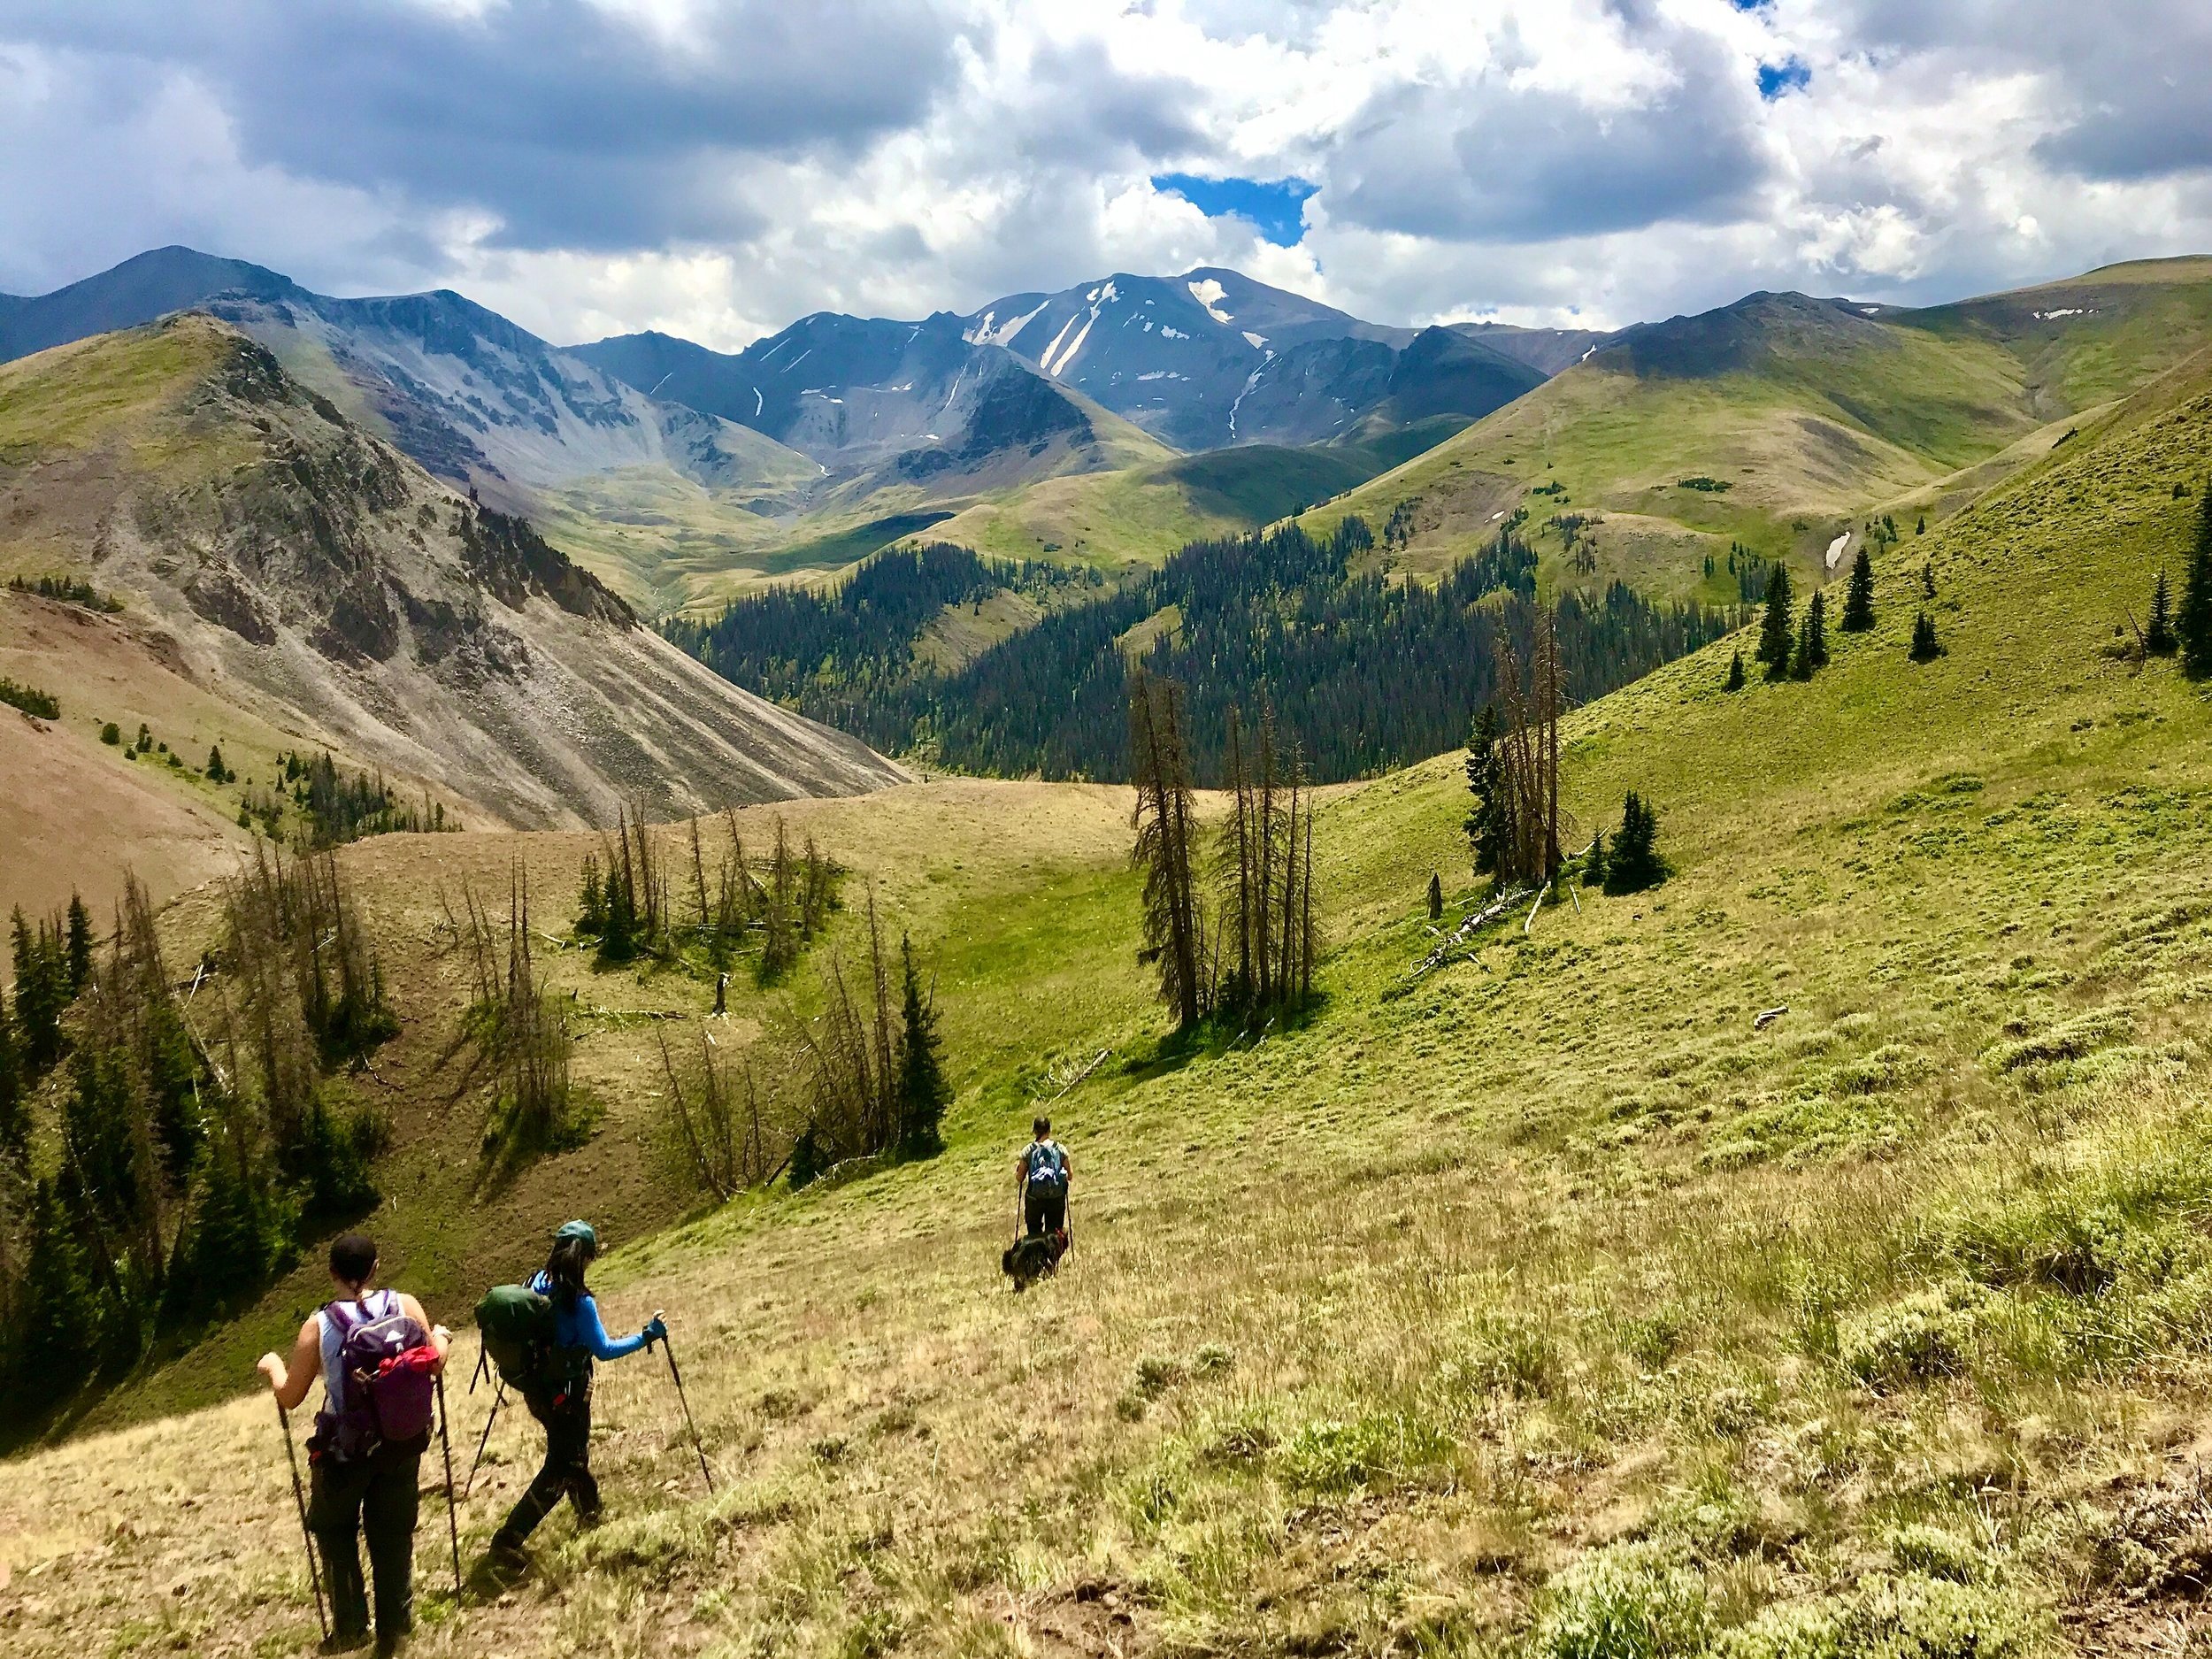  Summer 2020 - View of Guada, Stephi (&amp; Ollie), and April hiking to investigate wolf GPS clusters near Francs Peak, the tallest mountain in the Absaroka Range. This is also a place where cattle have been grazing for 100+ years, grizzly bears feed